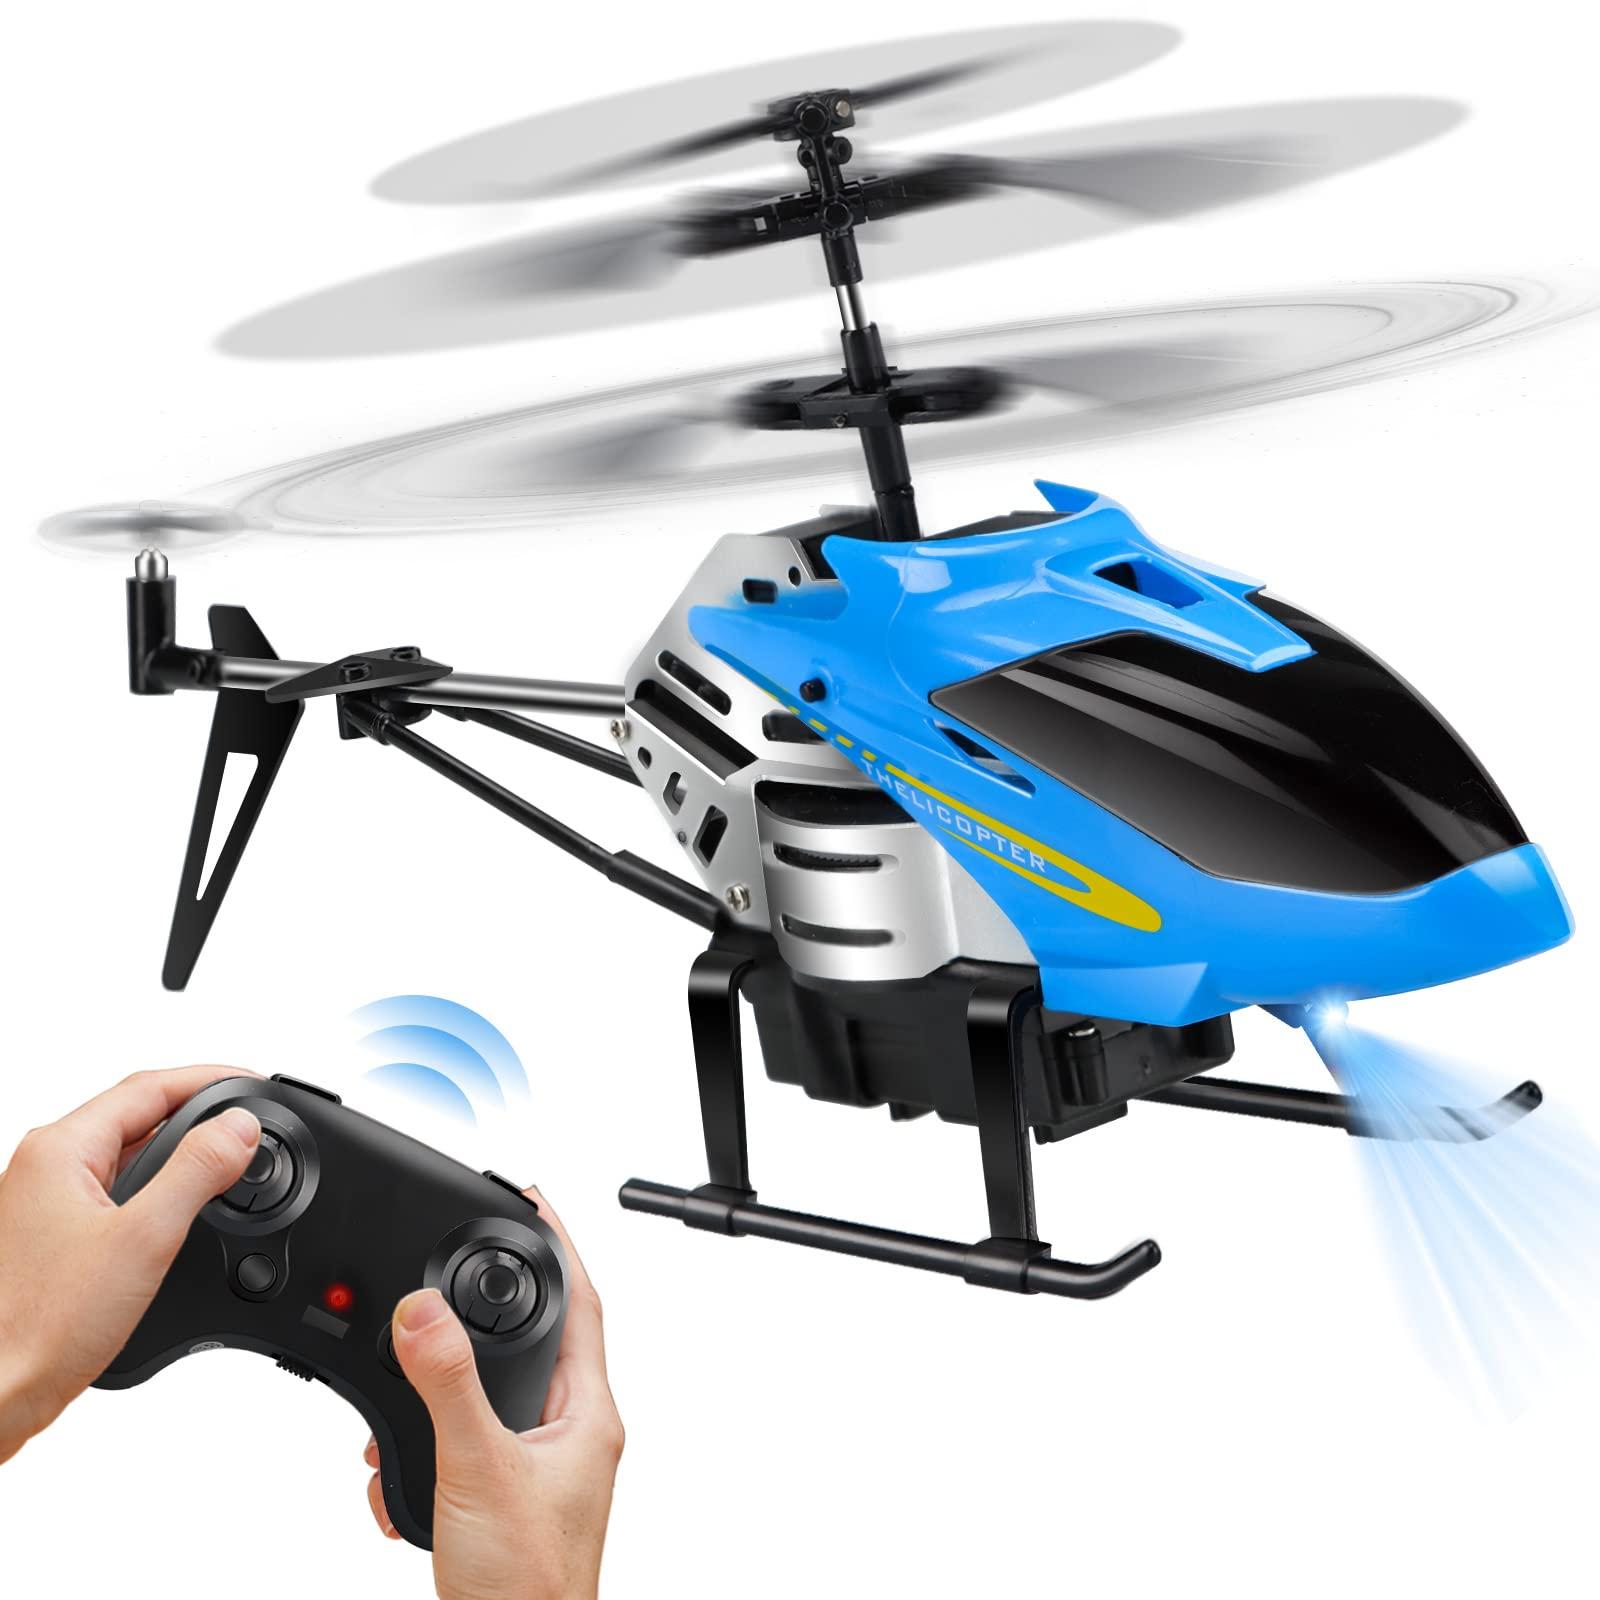 Remote Control Rc Helicopter Price: Affordable RC Helicopter Options 